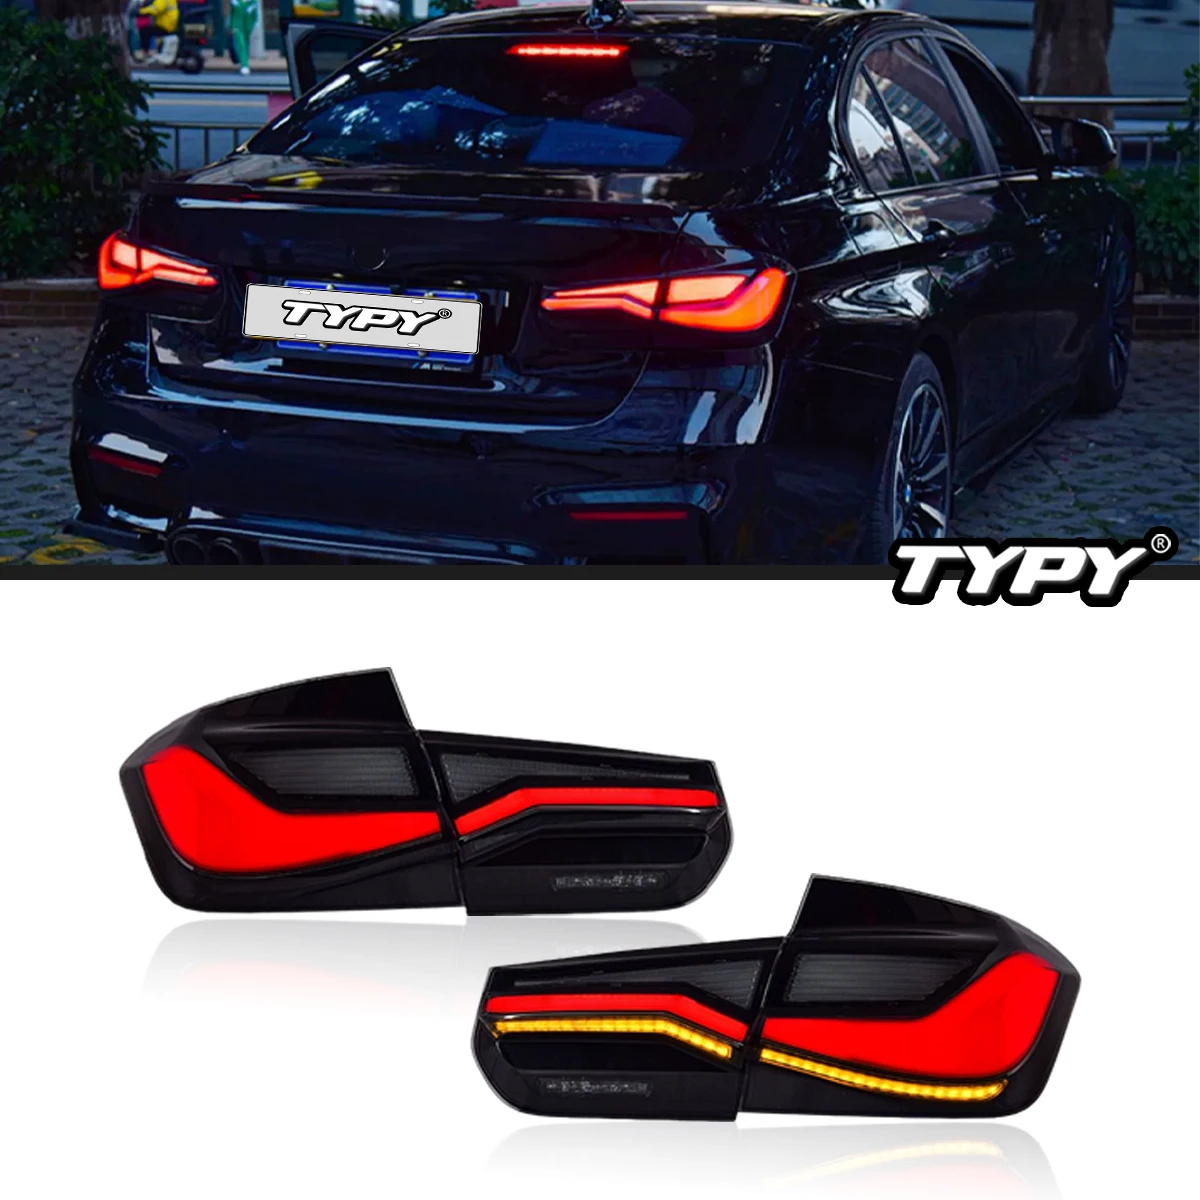 TYPY Car Tail Lights For BMW 3 Series F30 Taillight 2013-2018 LED Car Ta... - $635.66